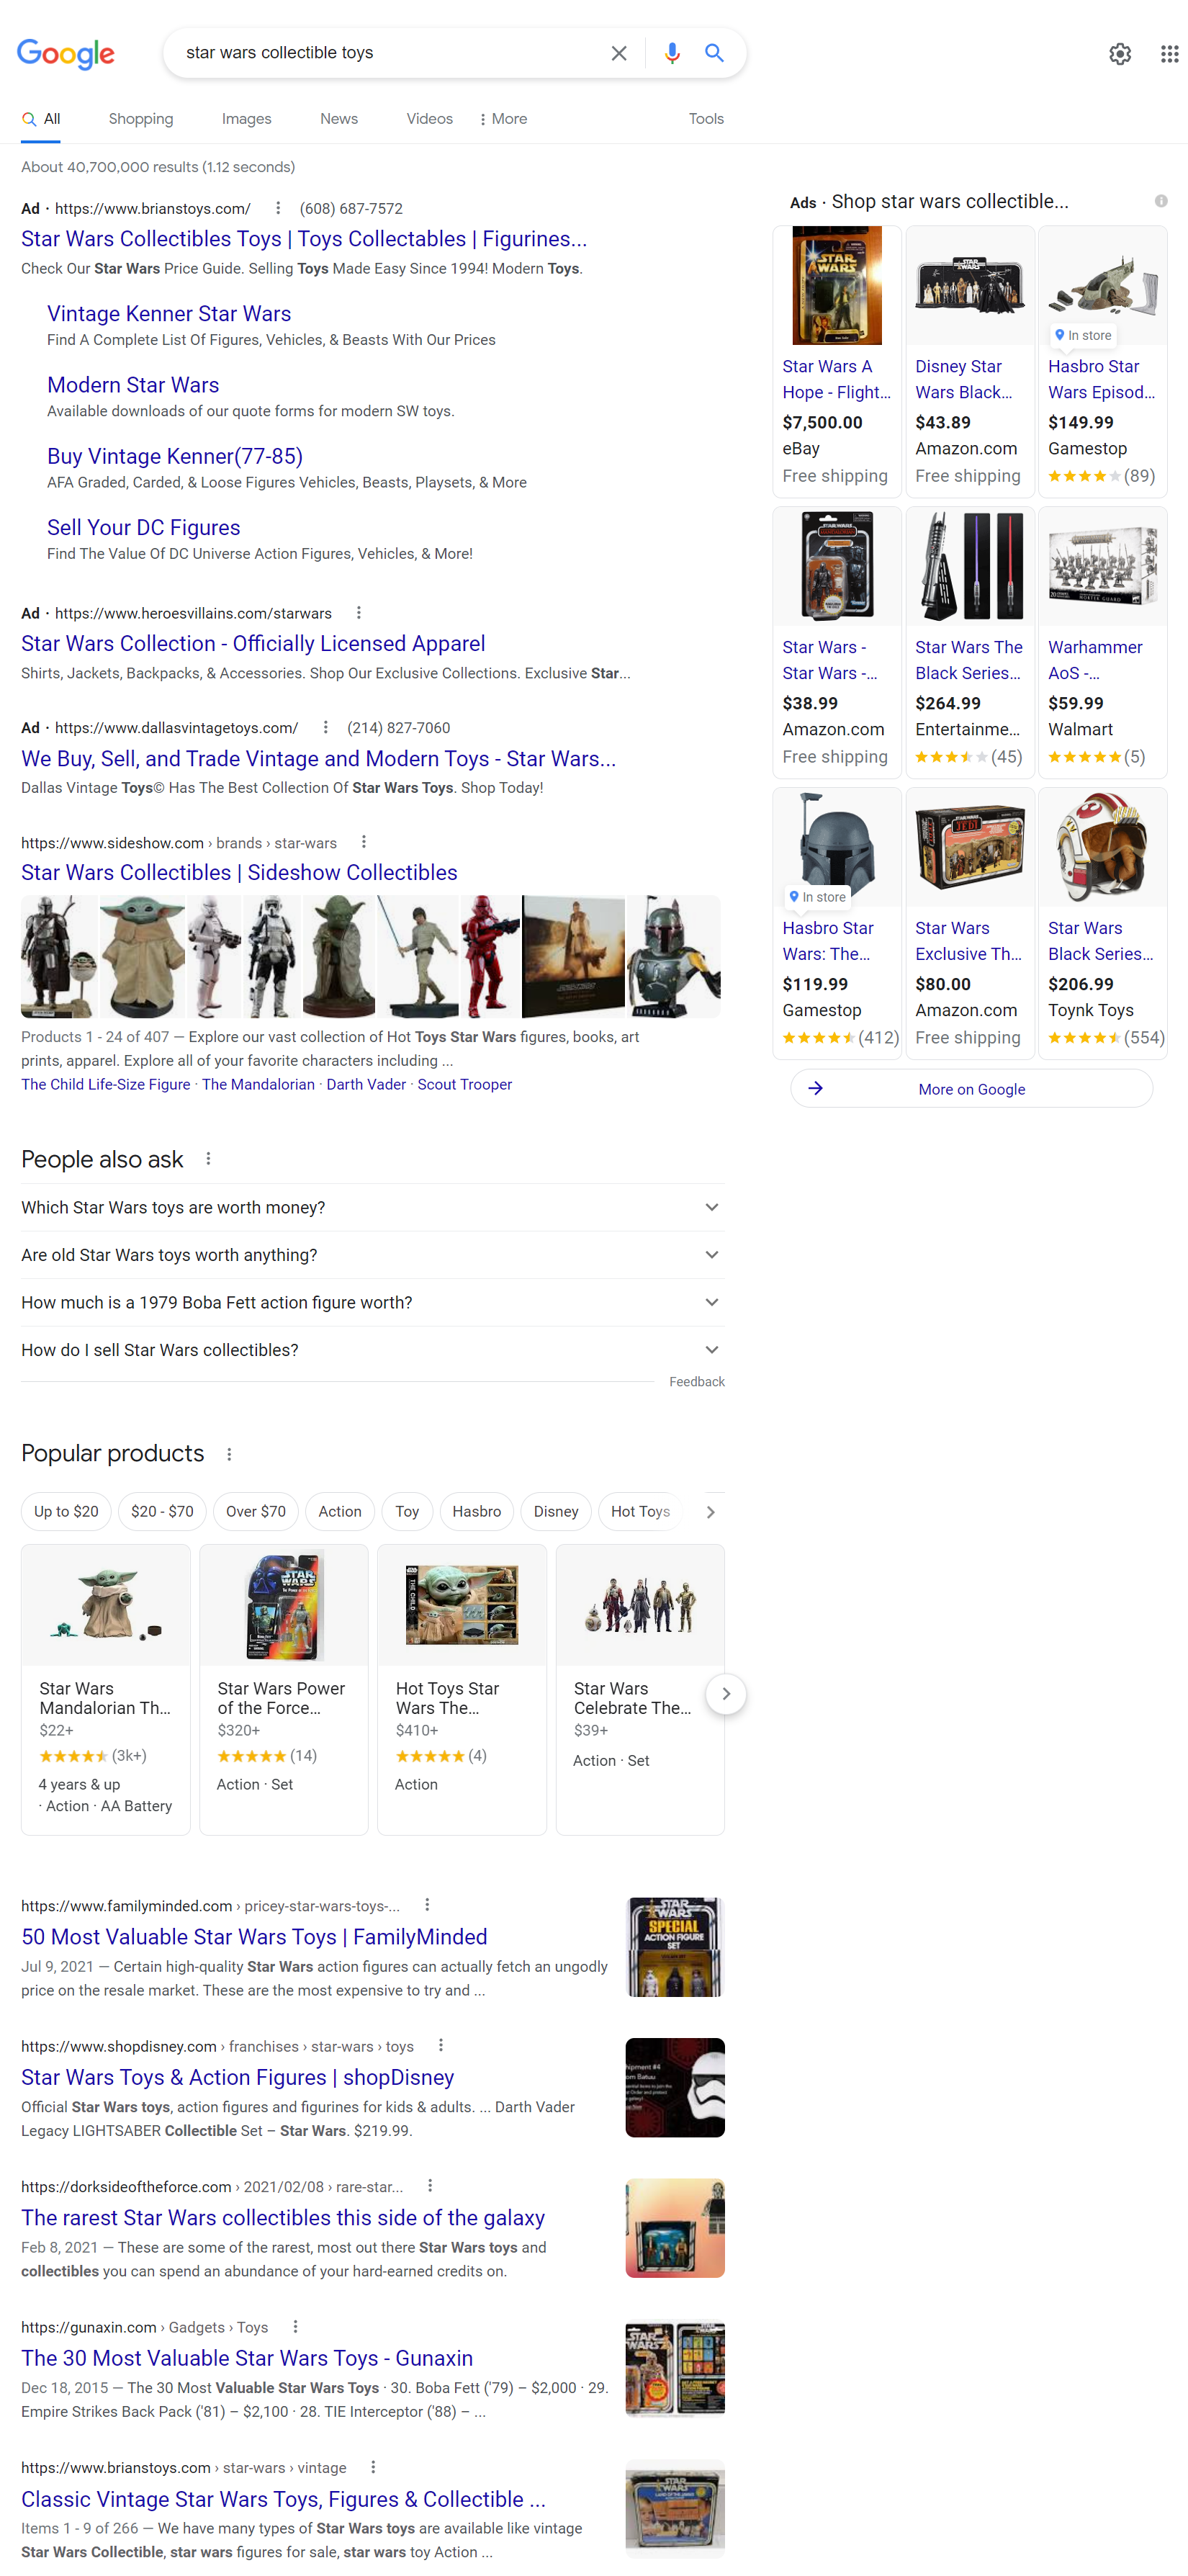 SERP results for "star wars collective toys" with images in a variety of sections on the page